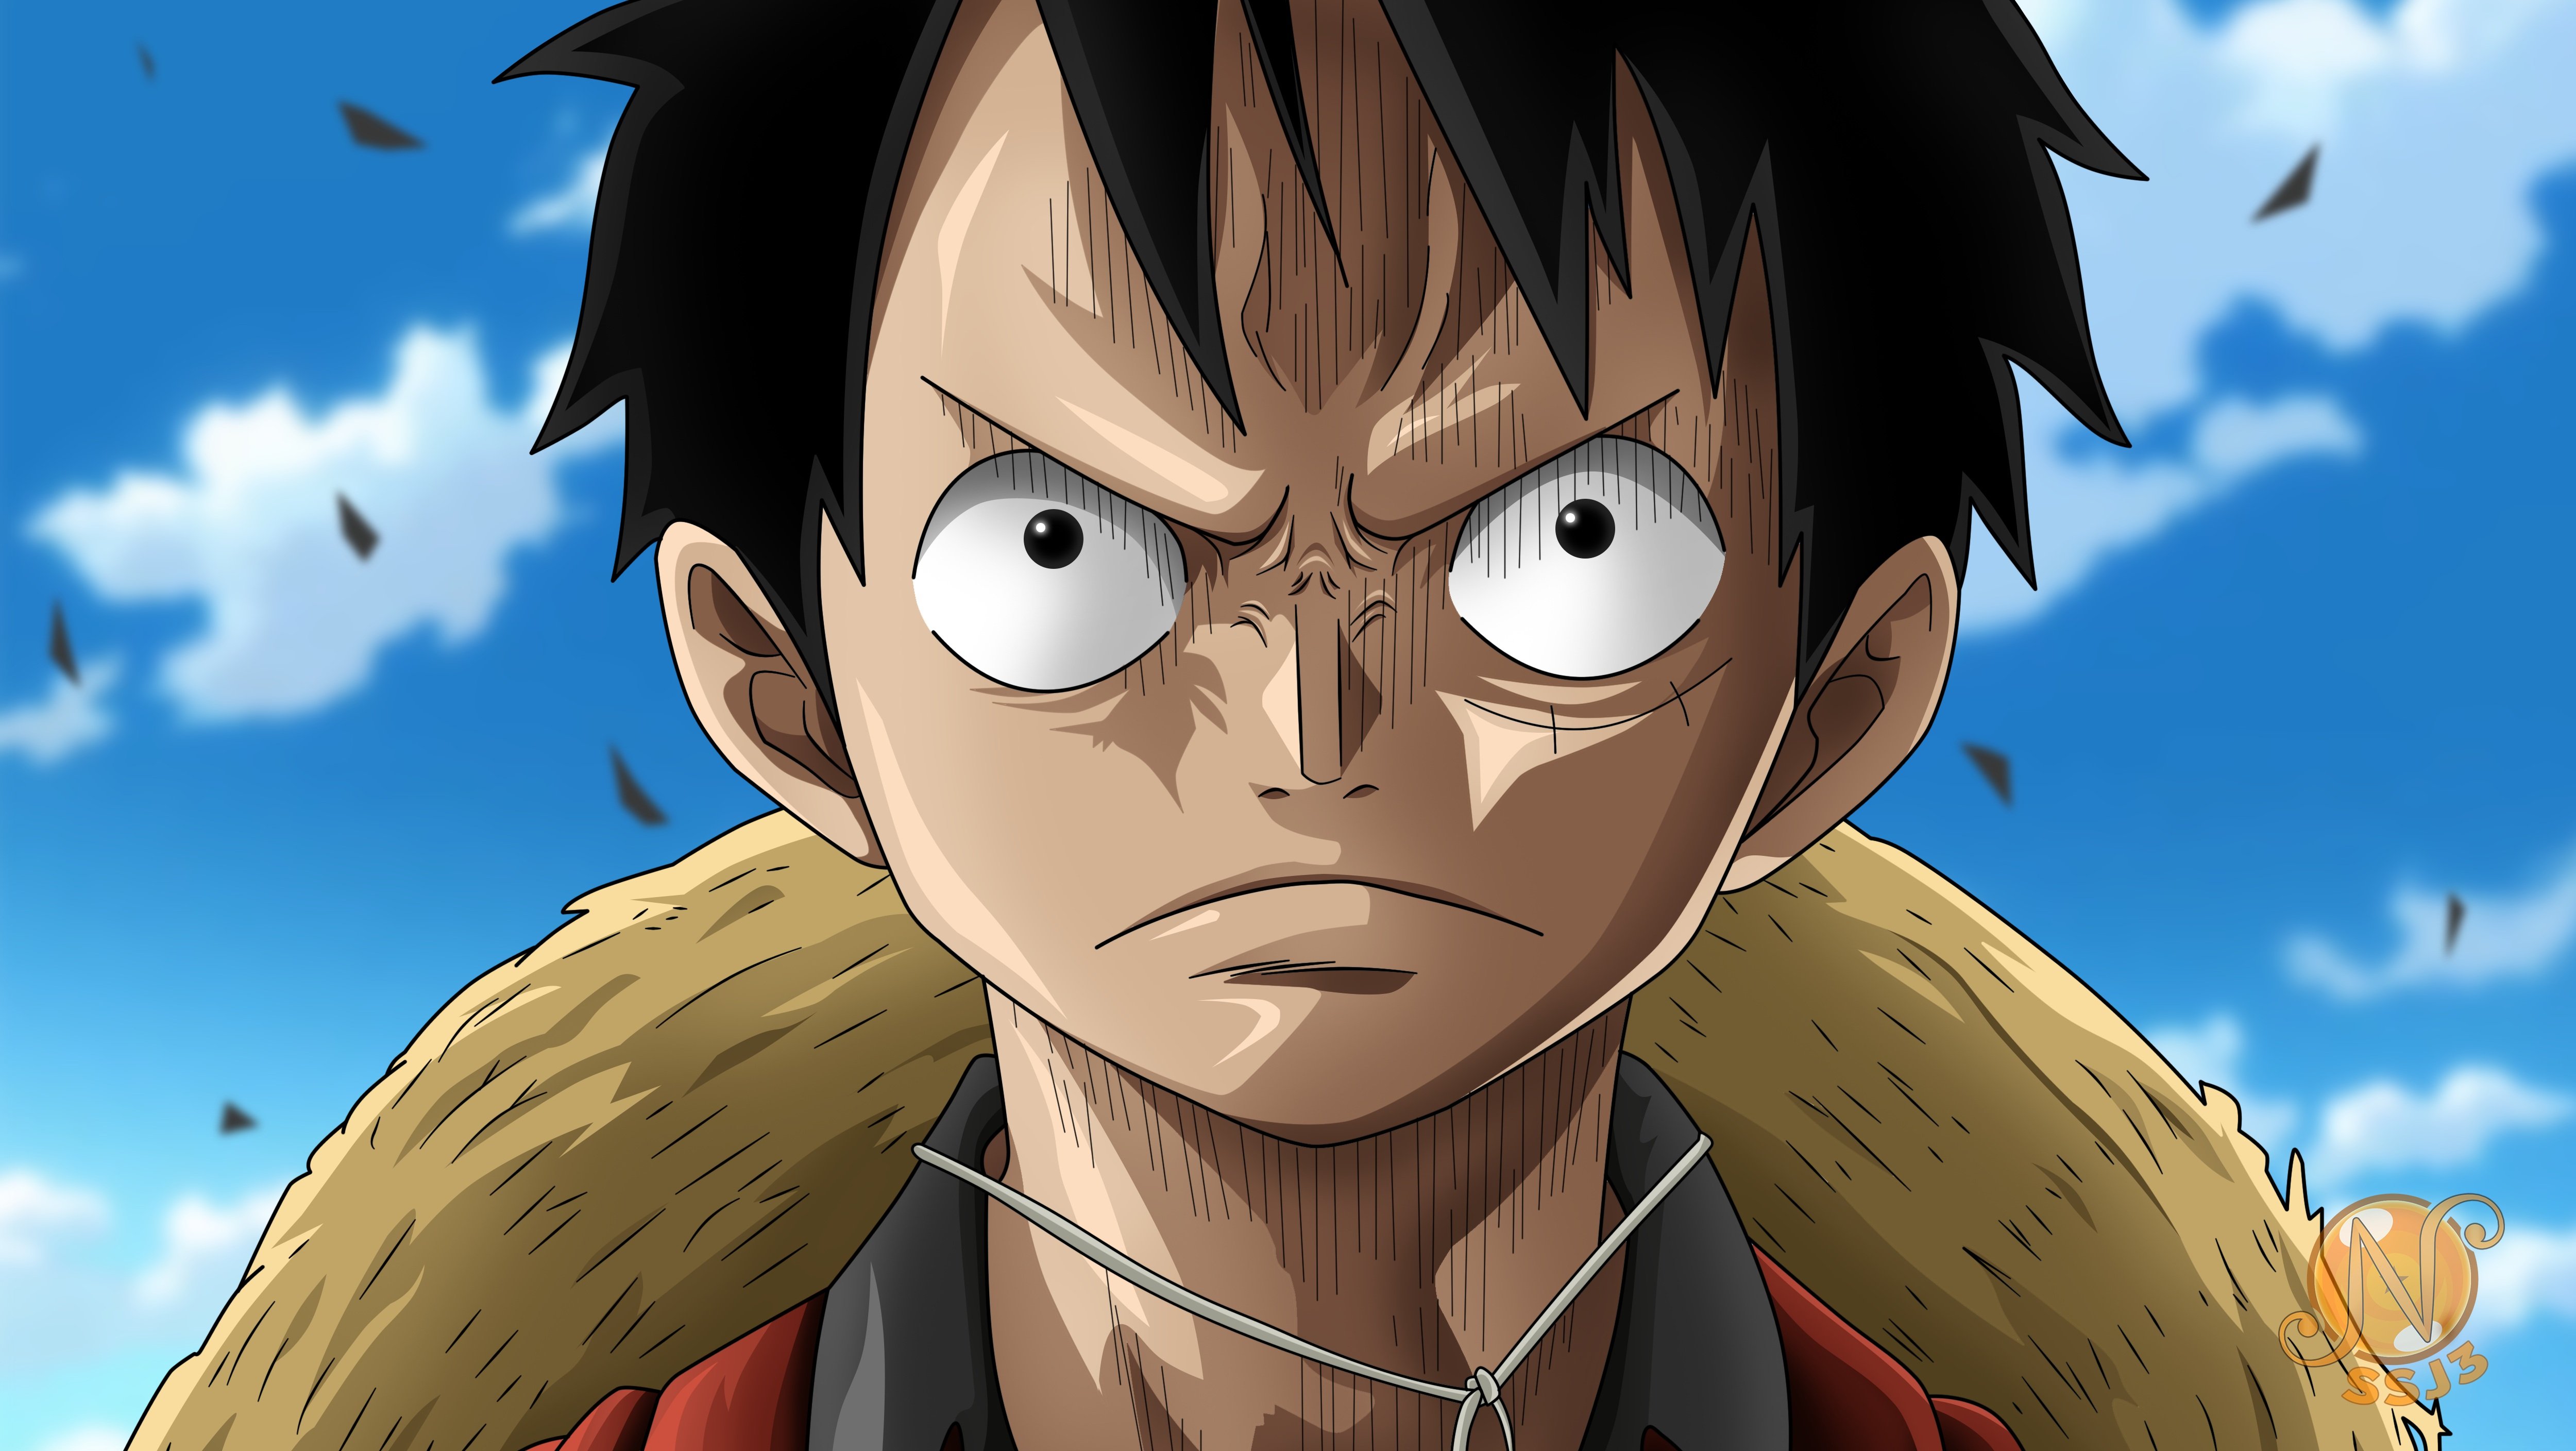 Monkey D Luffy From One Piece Anime Wallpaper Id 4015